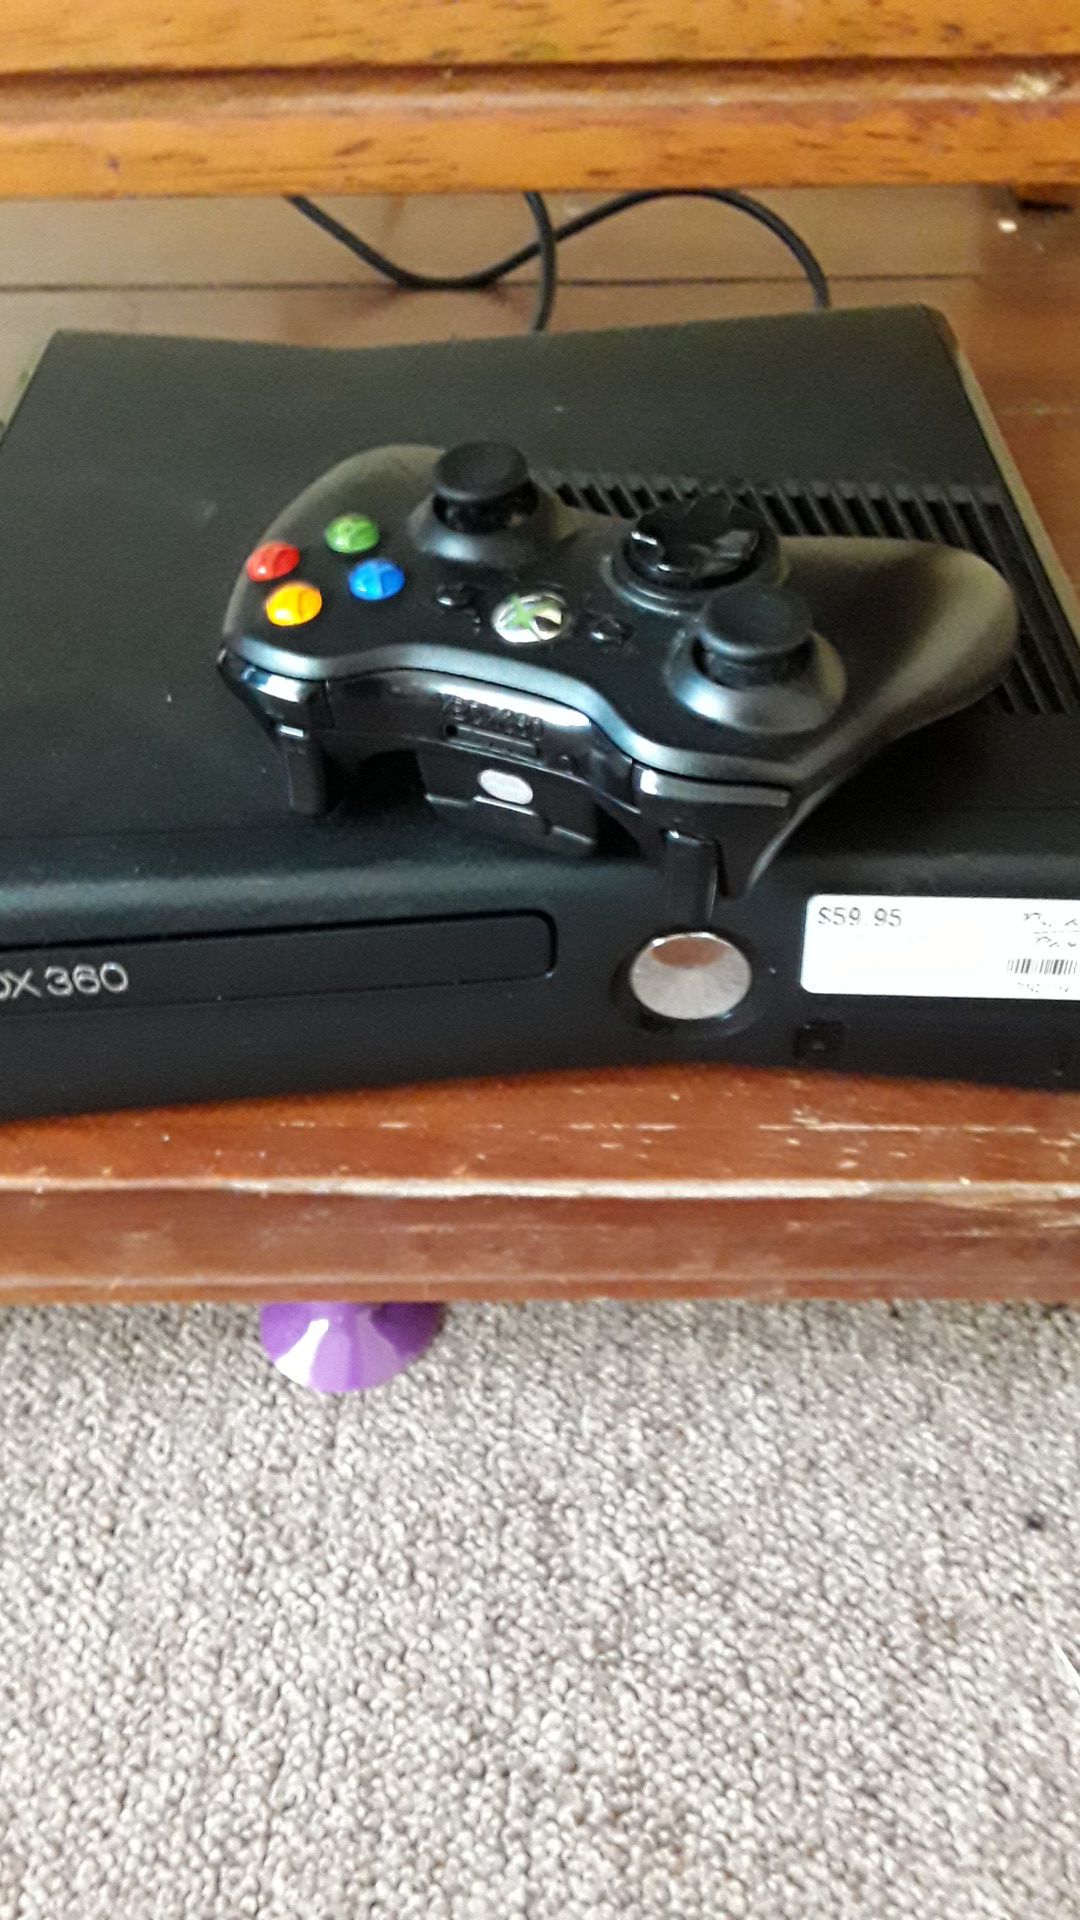 Xbox 360 comes with 5 games and controller